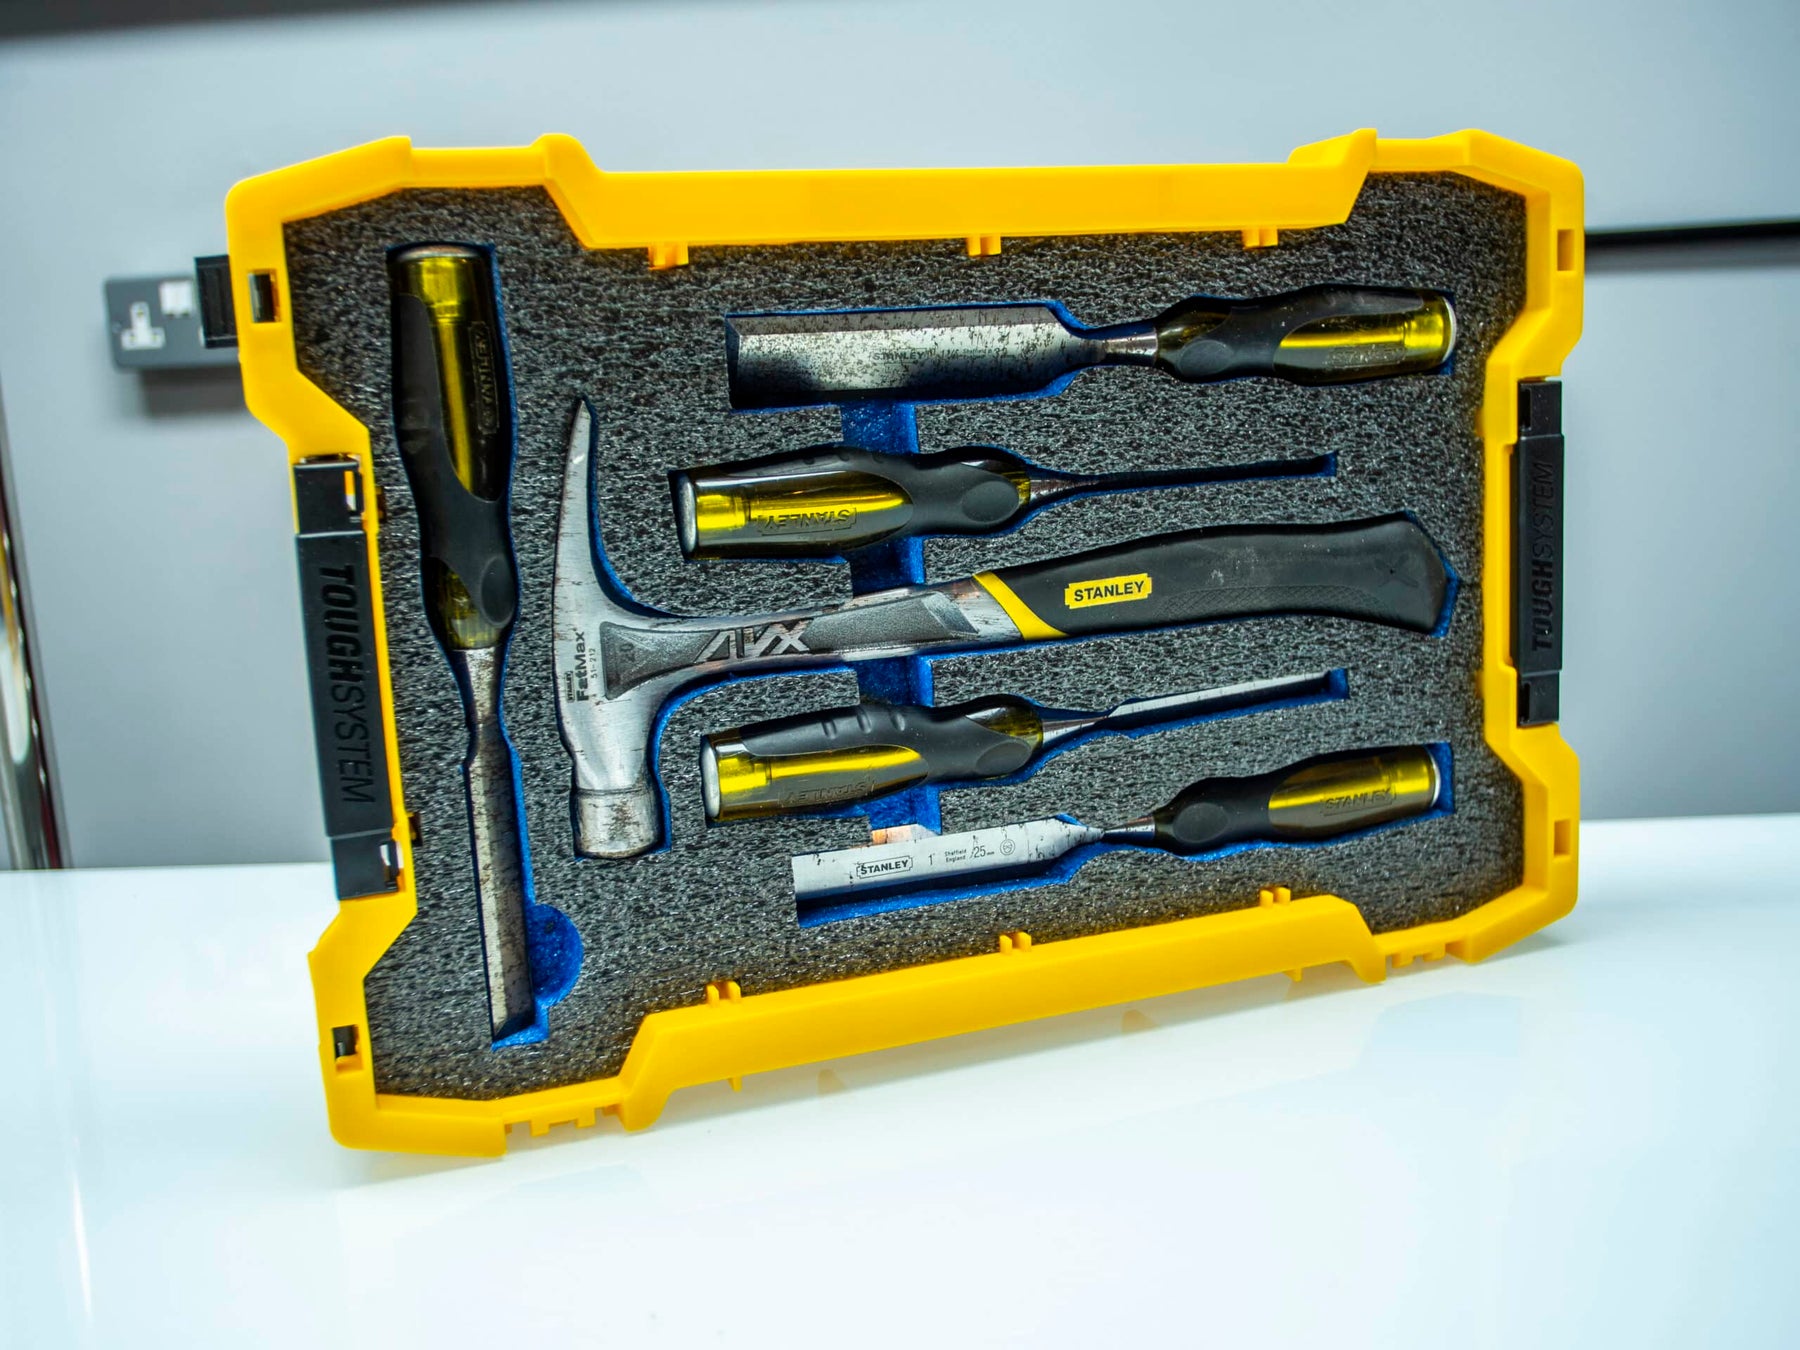 Get the most from your Dewalt Toughsystem 2.0 trays